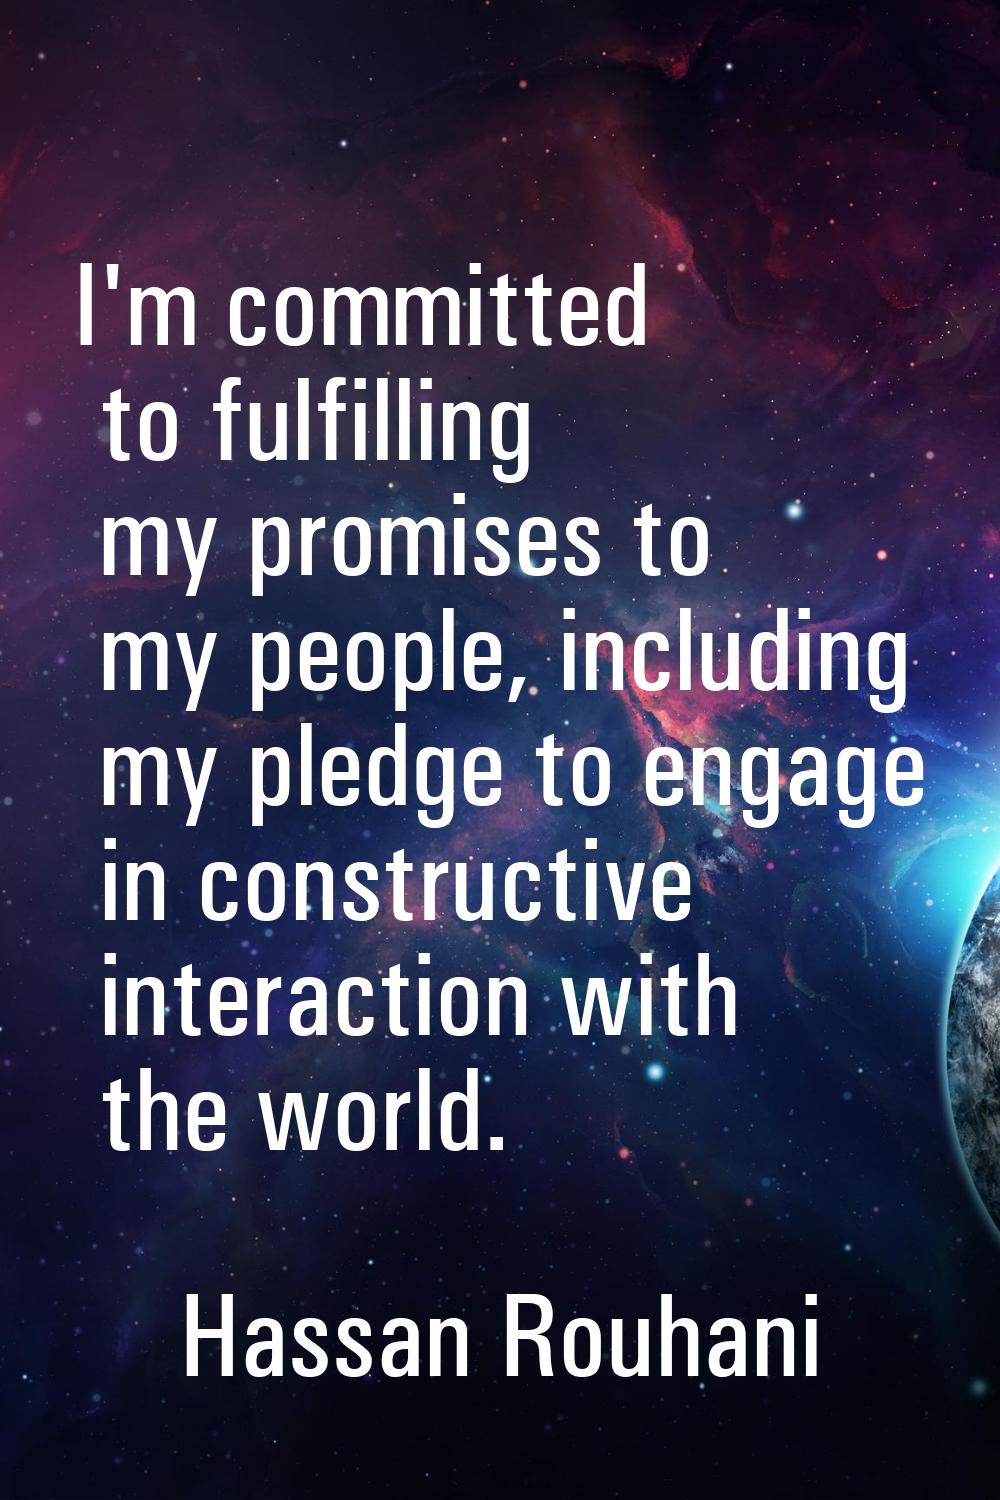 I'm committed to fulfilling my promises to my people, including my pledge to engage in constructive